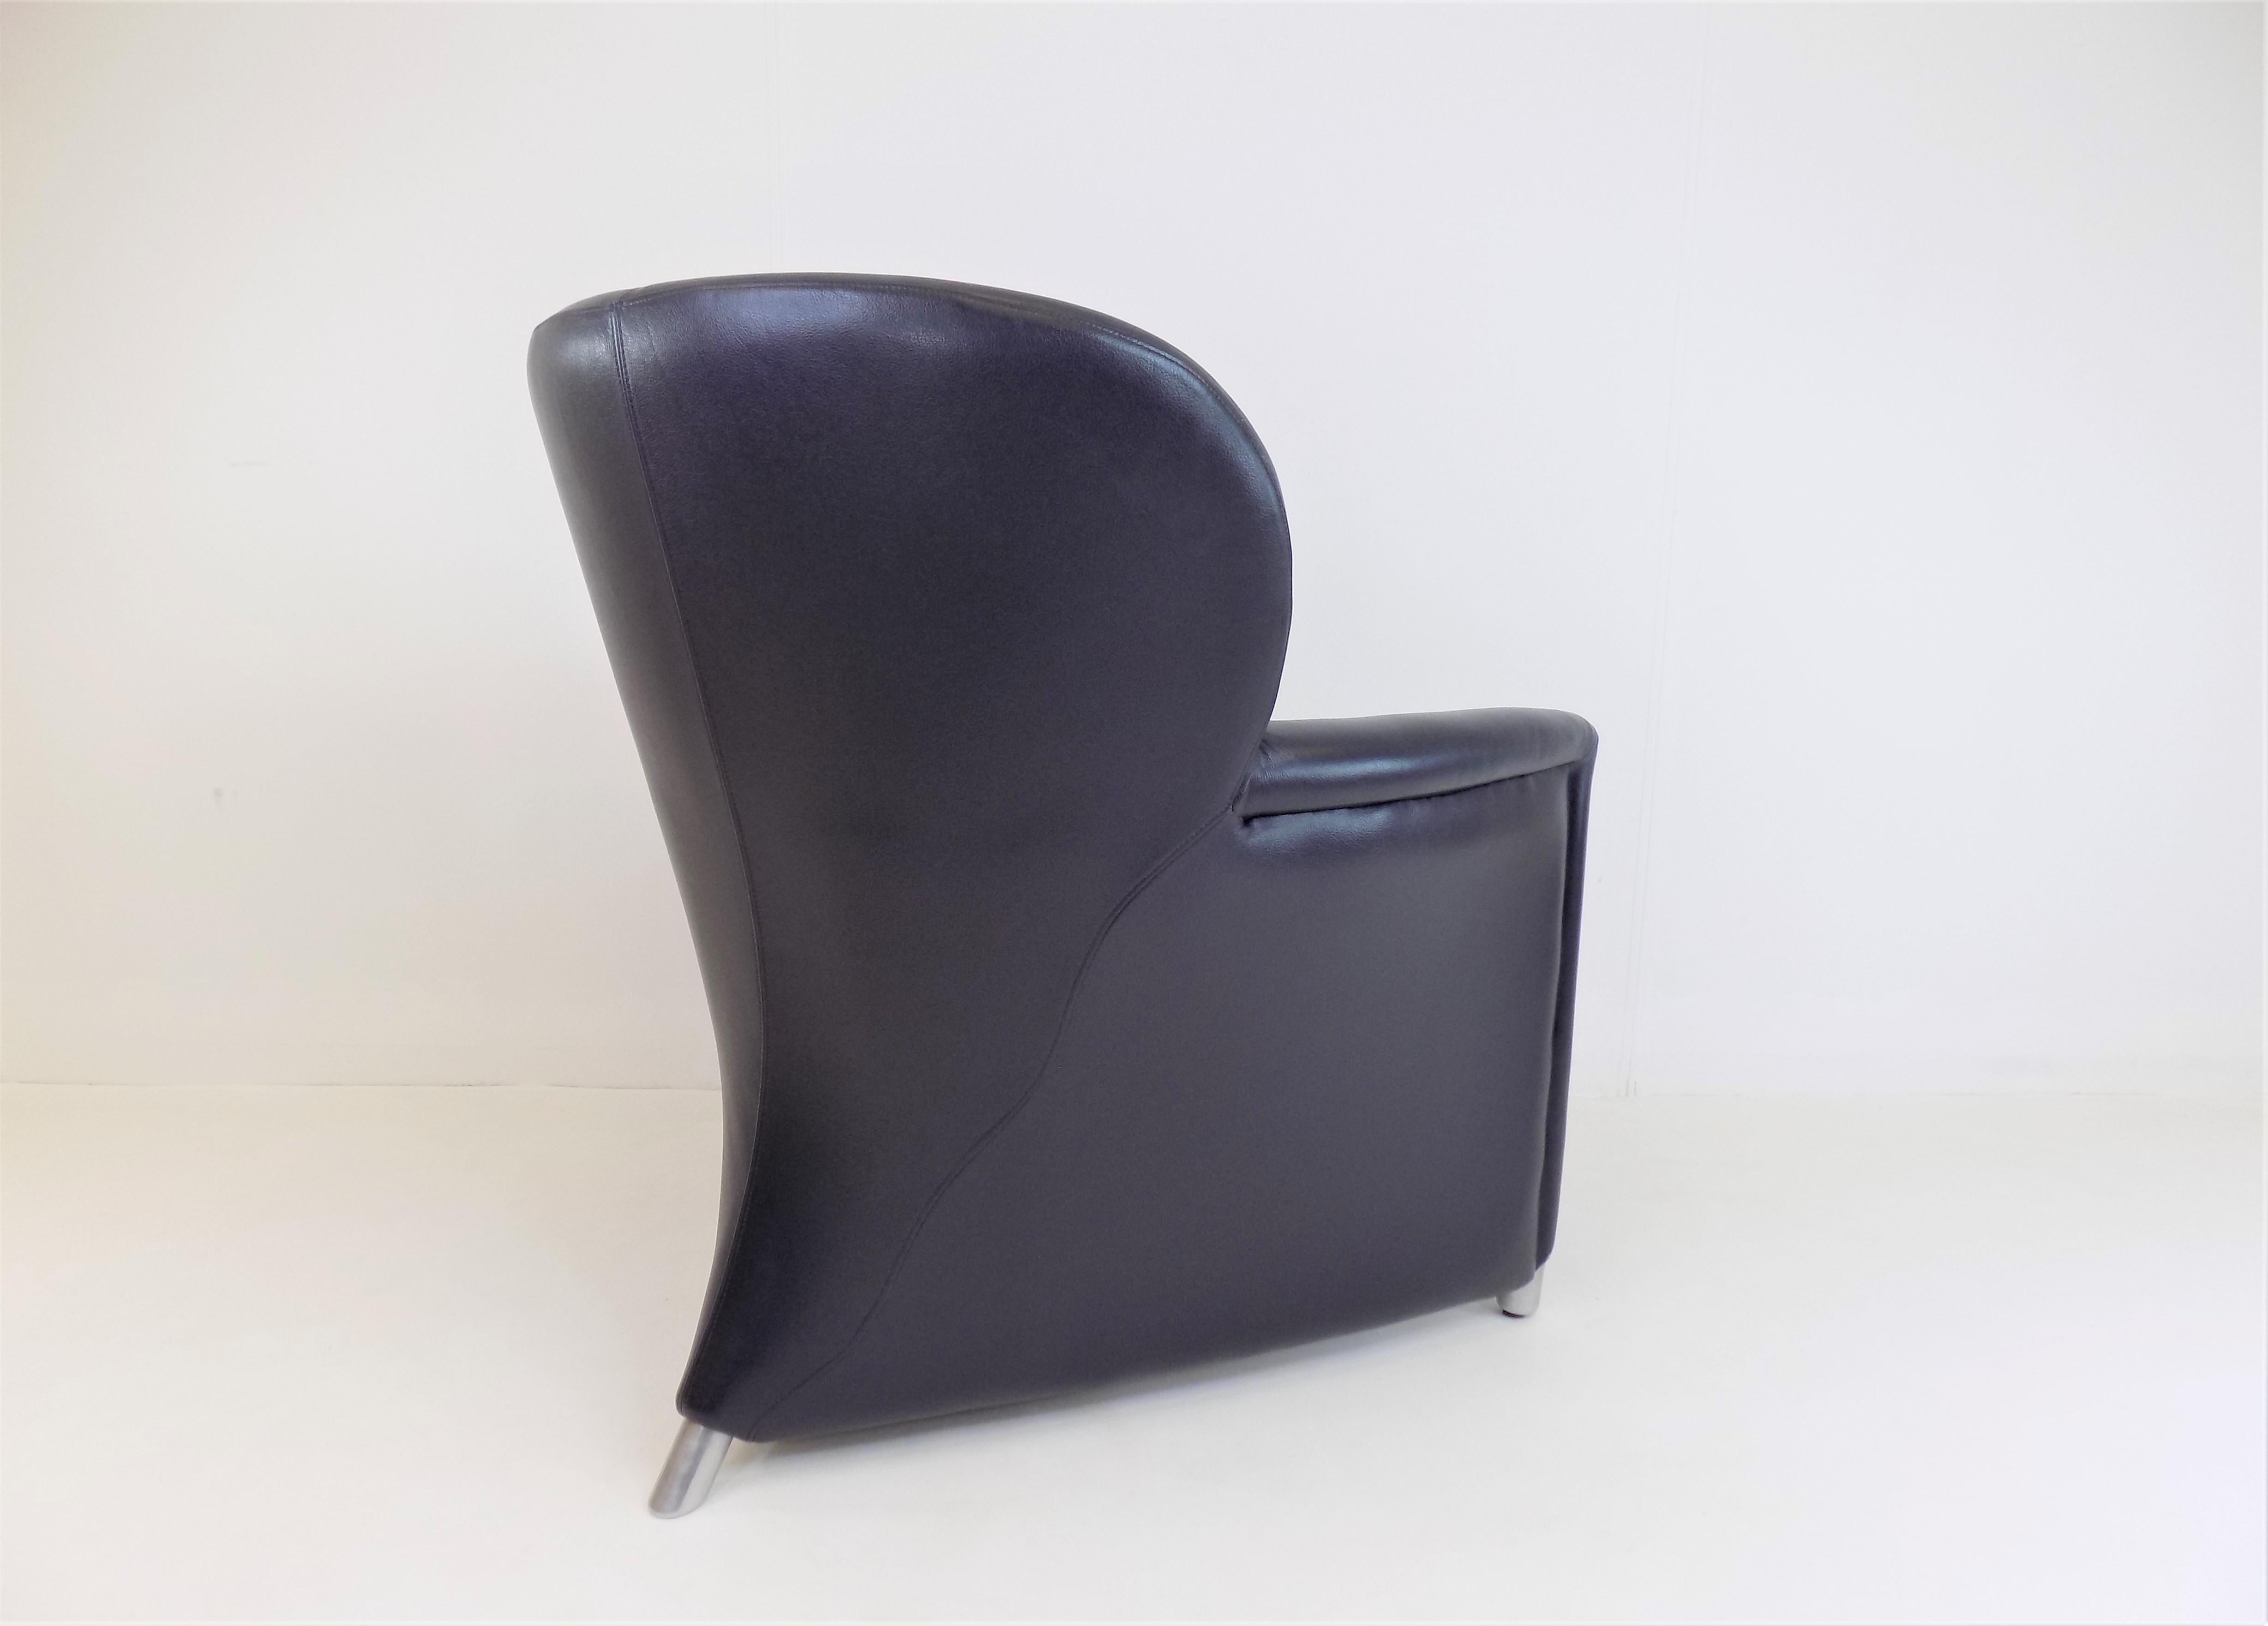 Leolux Excalibur leather armchair by Jan Armgardt 5